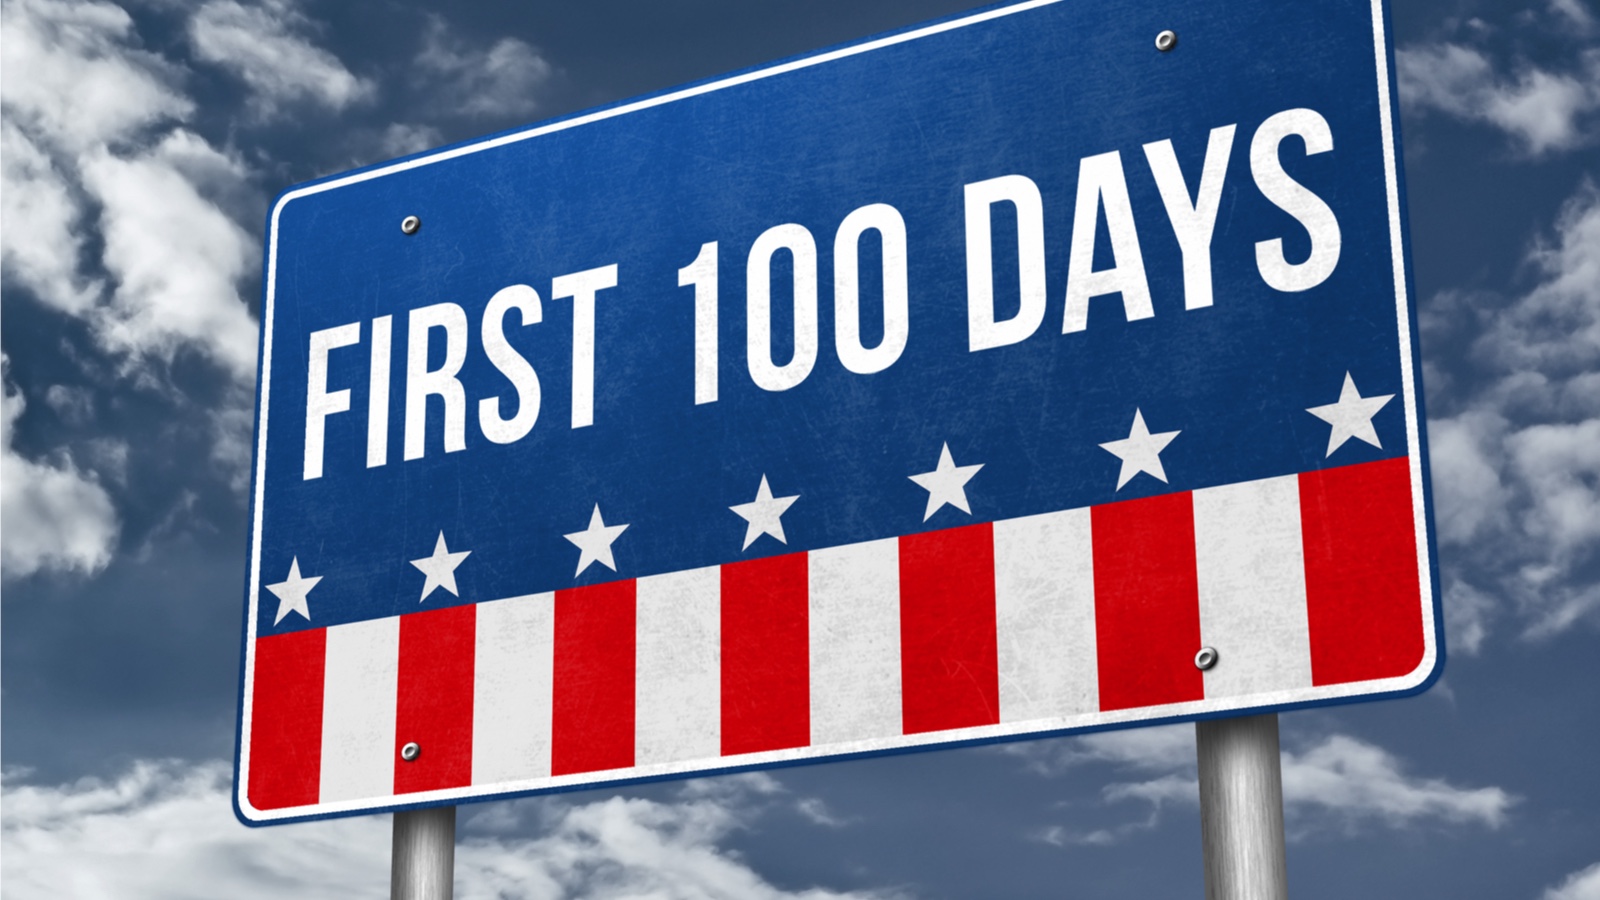 The Biden Administration’s First 100 Days: A Milestone for Higher Education?